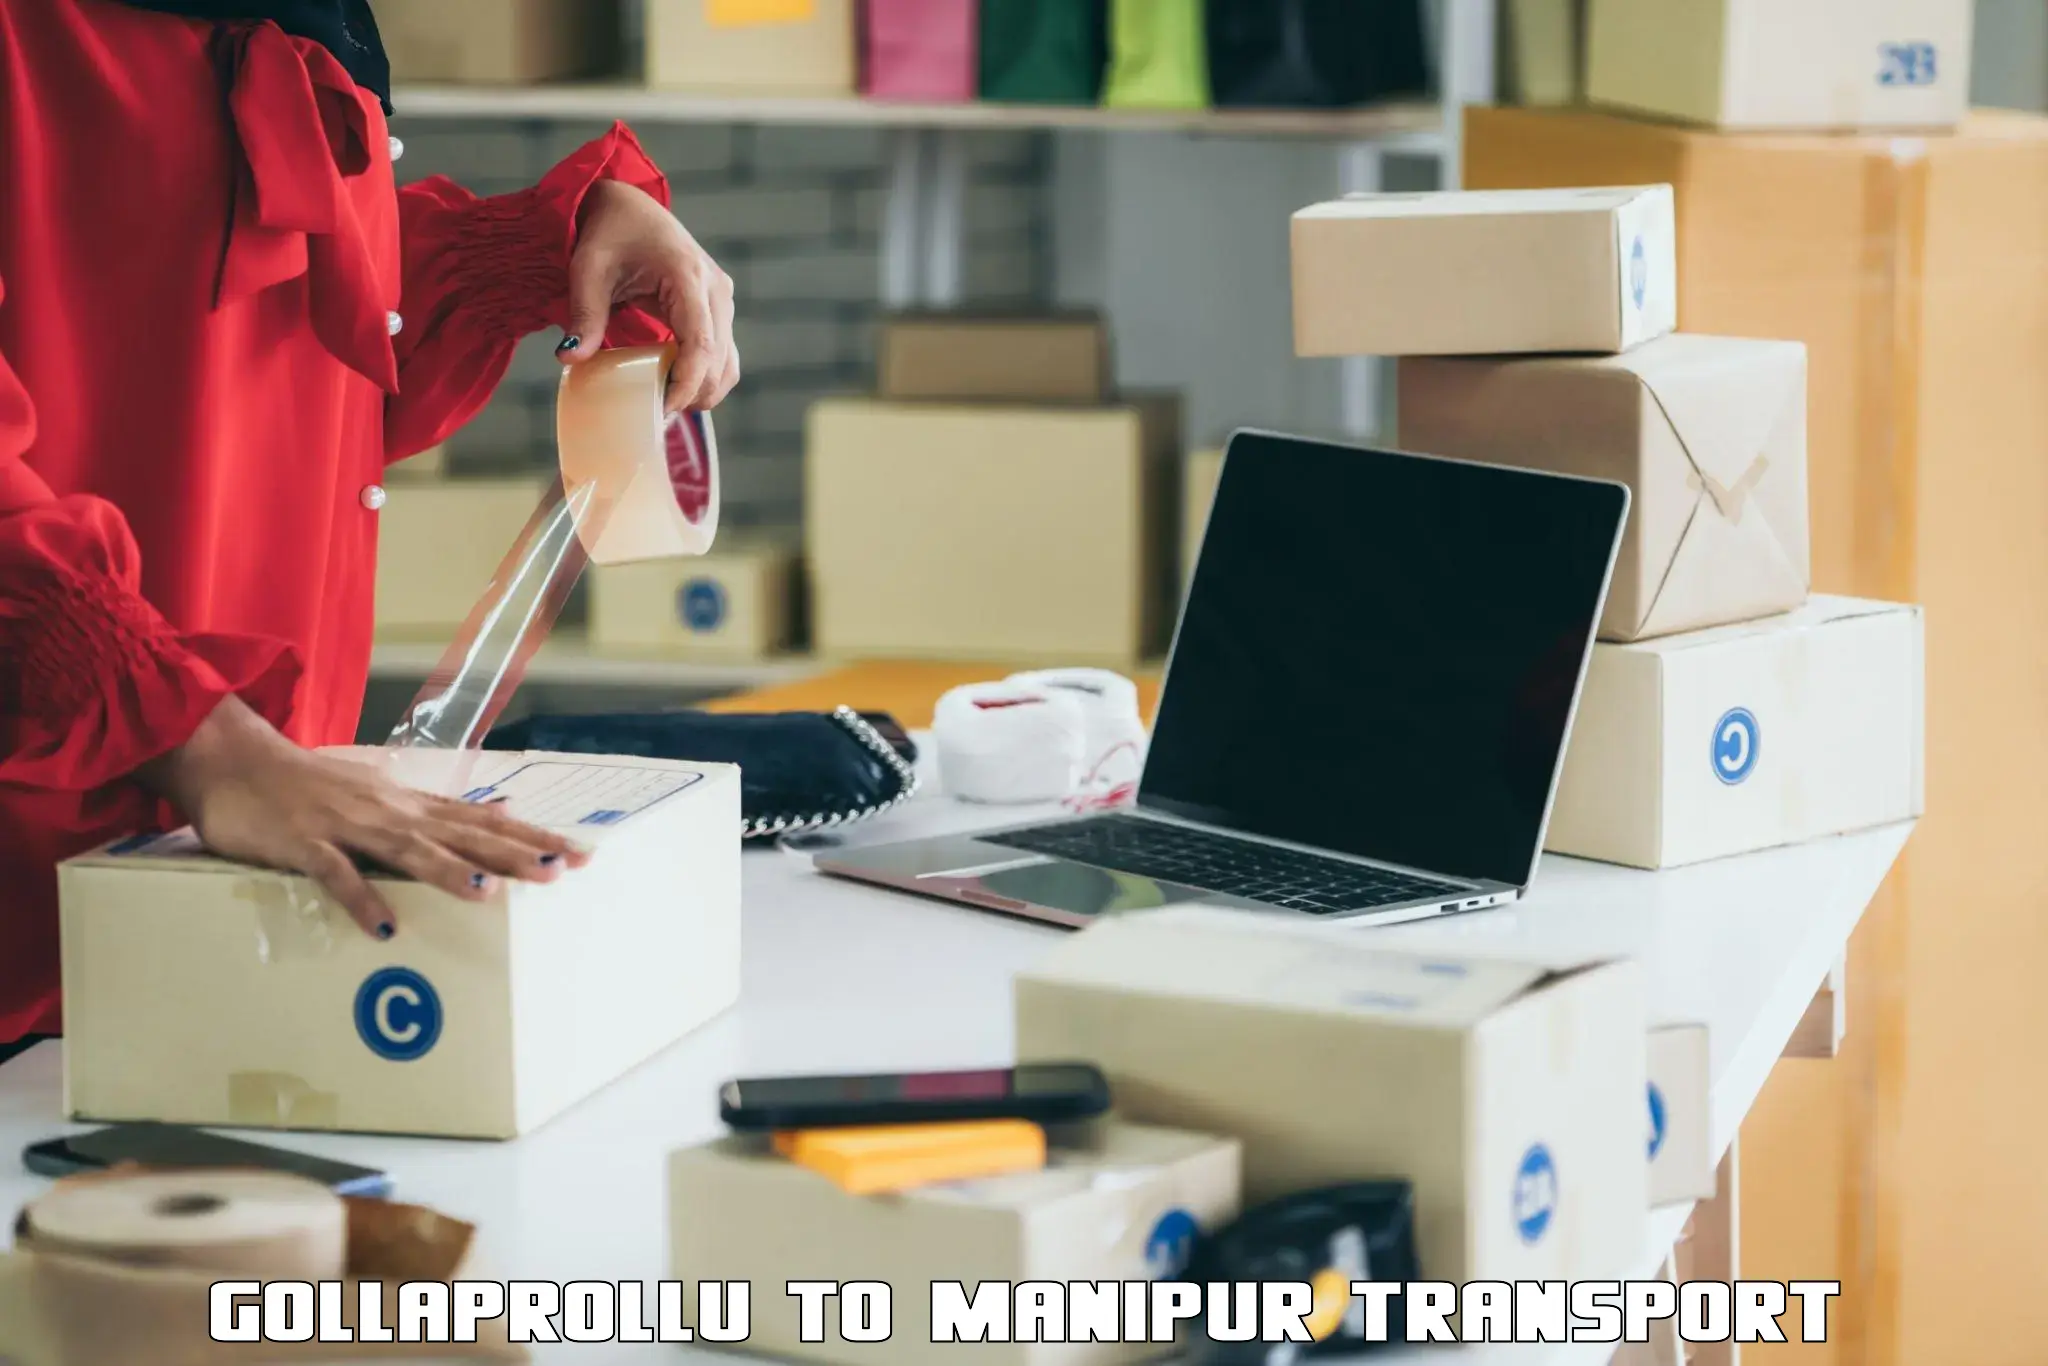 Package delivery services Gollaprollu to Manipur